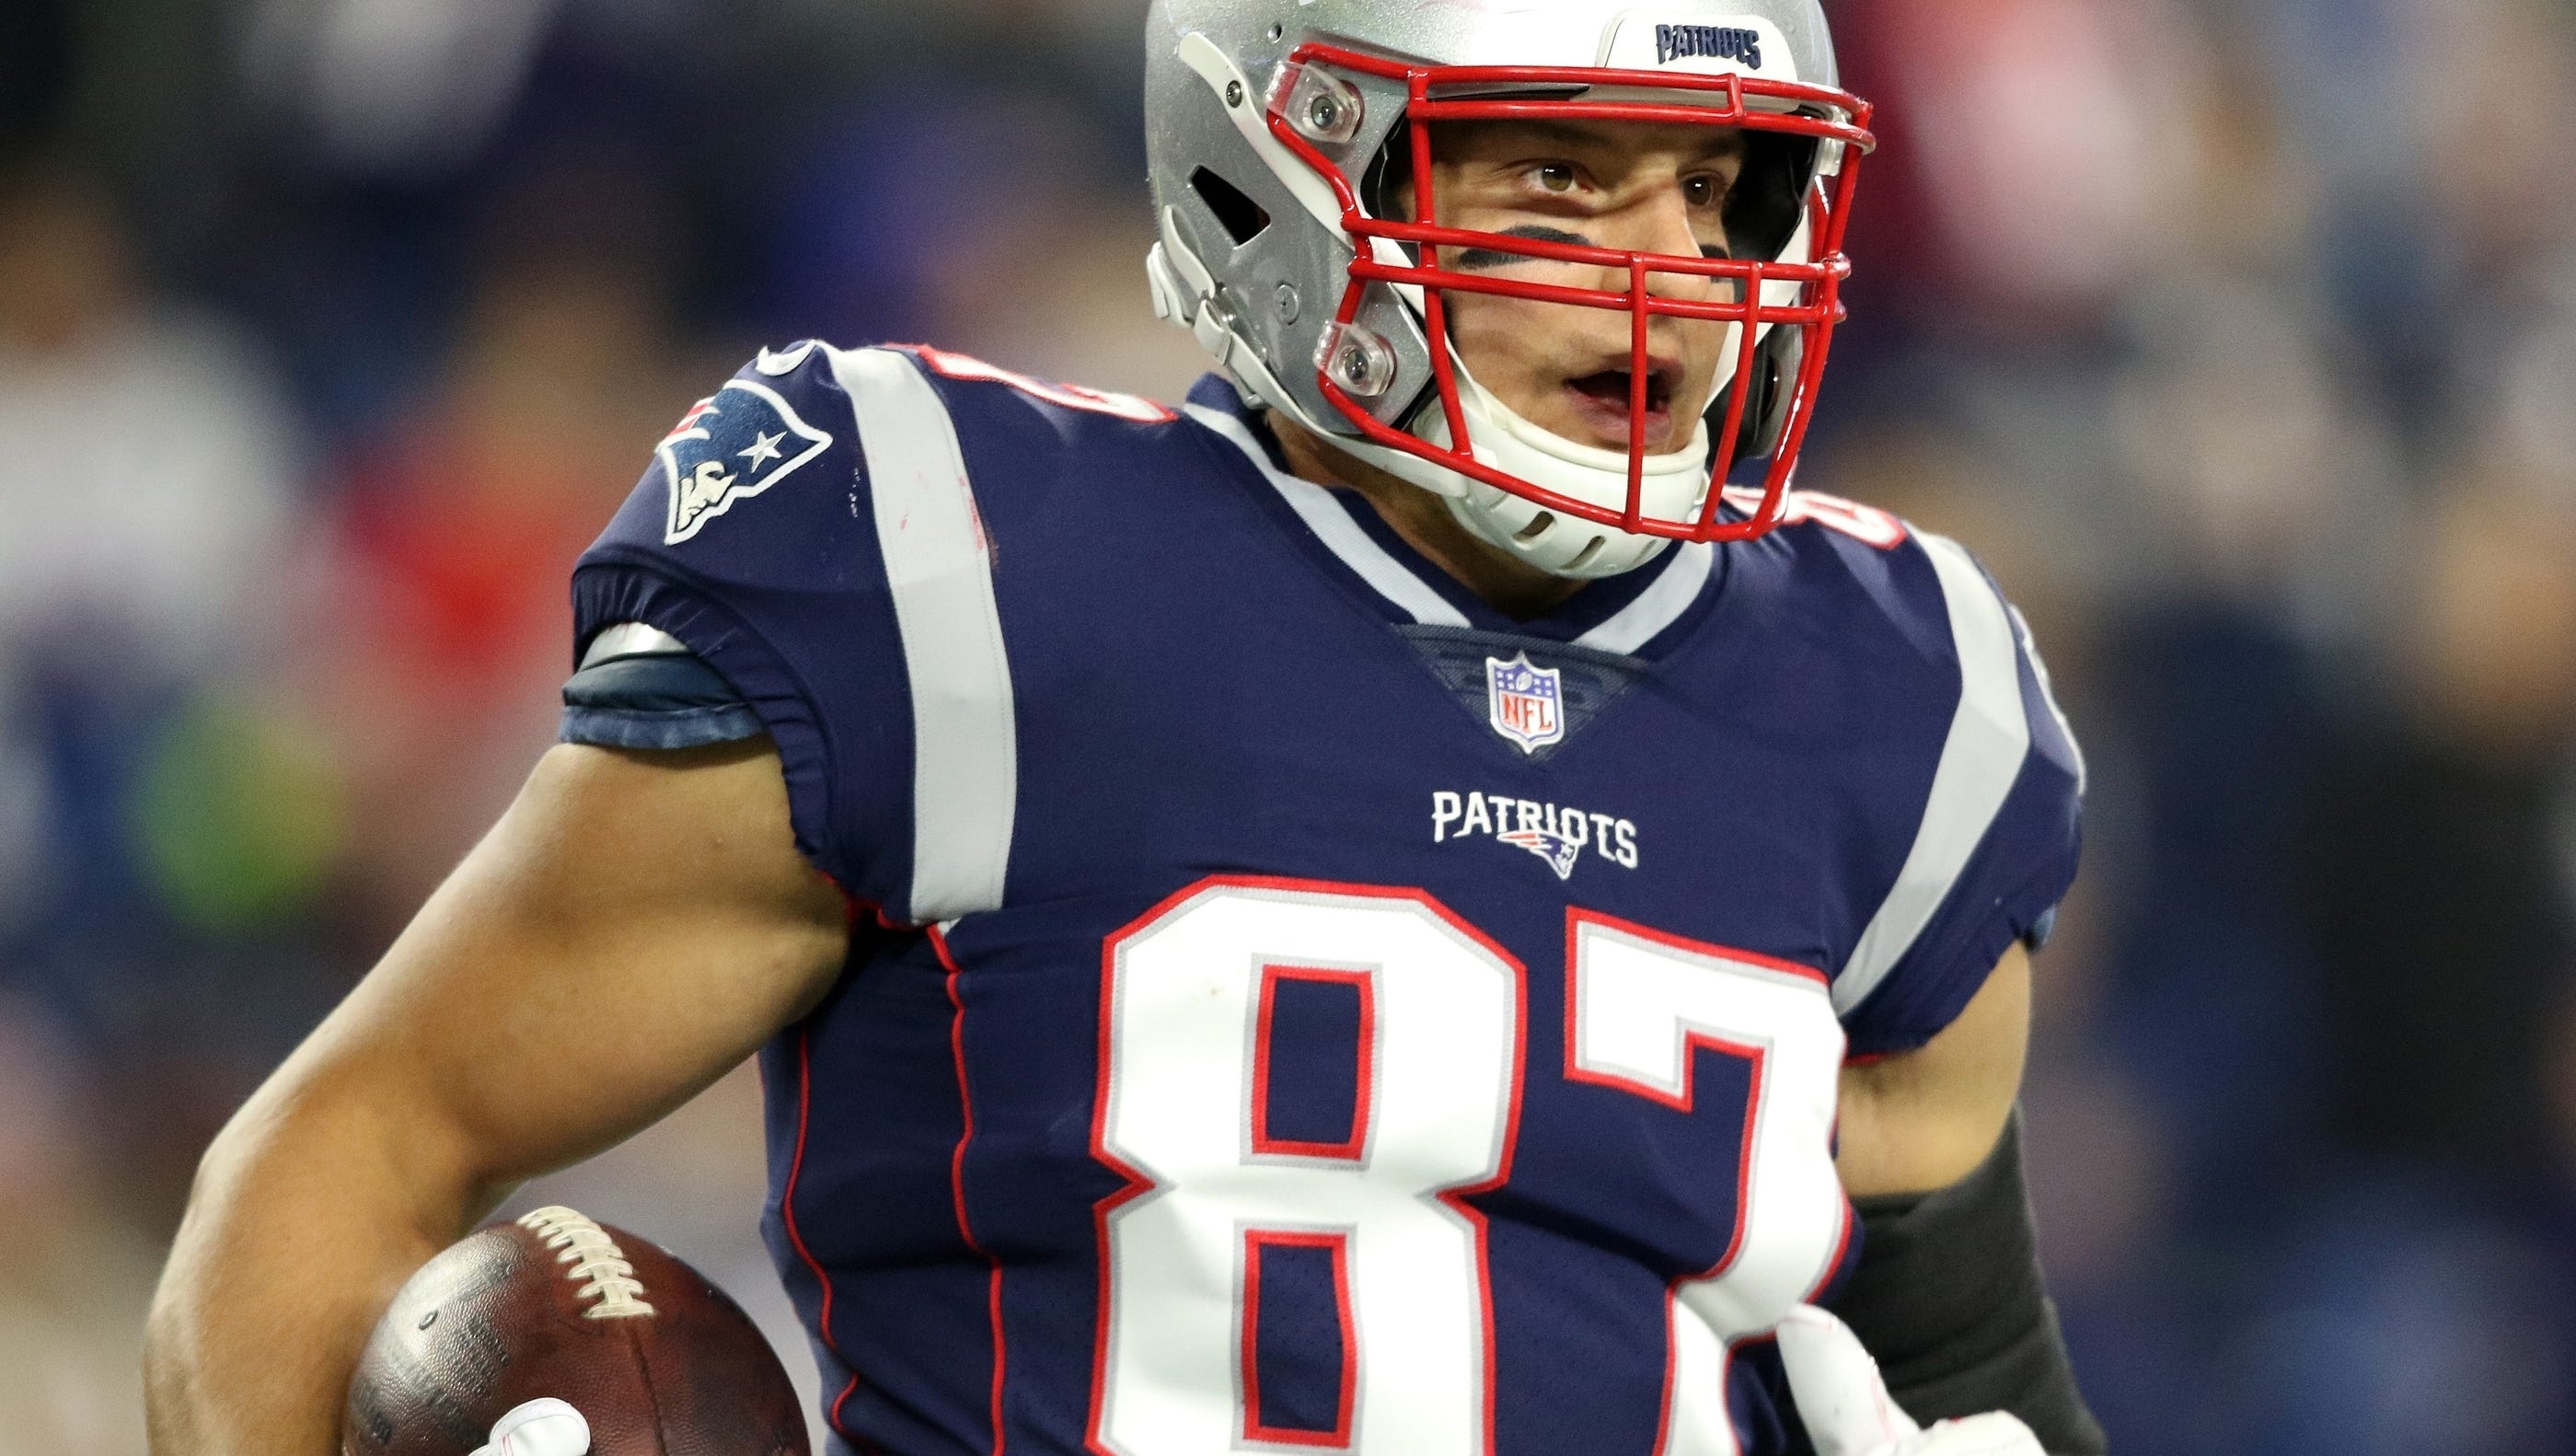 On speculation he'll come back, Gronk says 'it's a no'